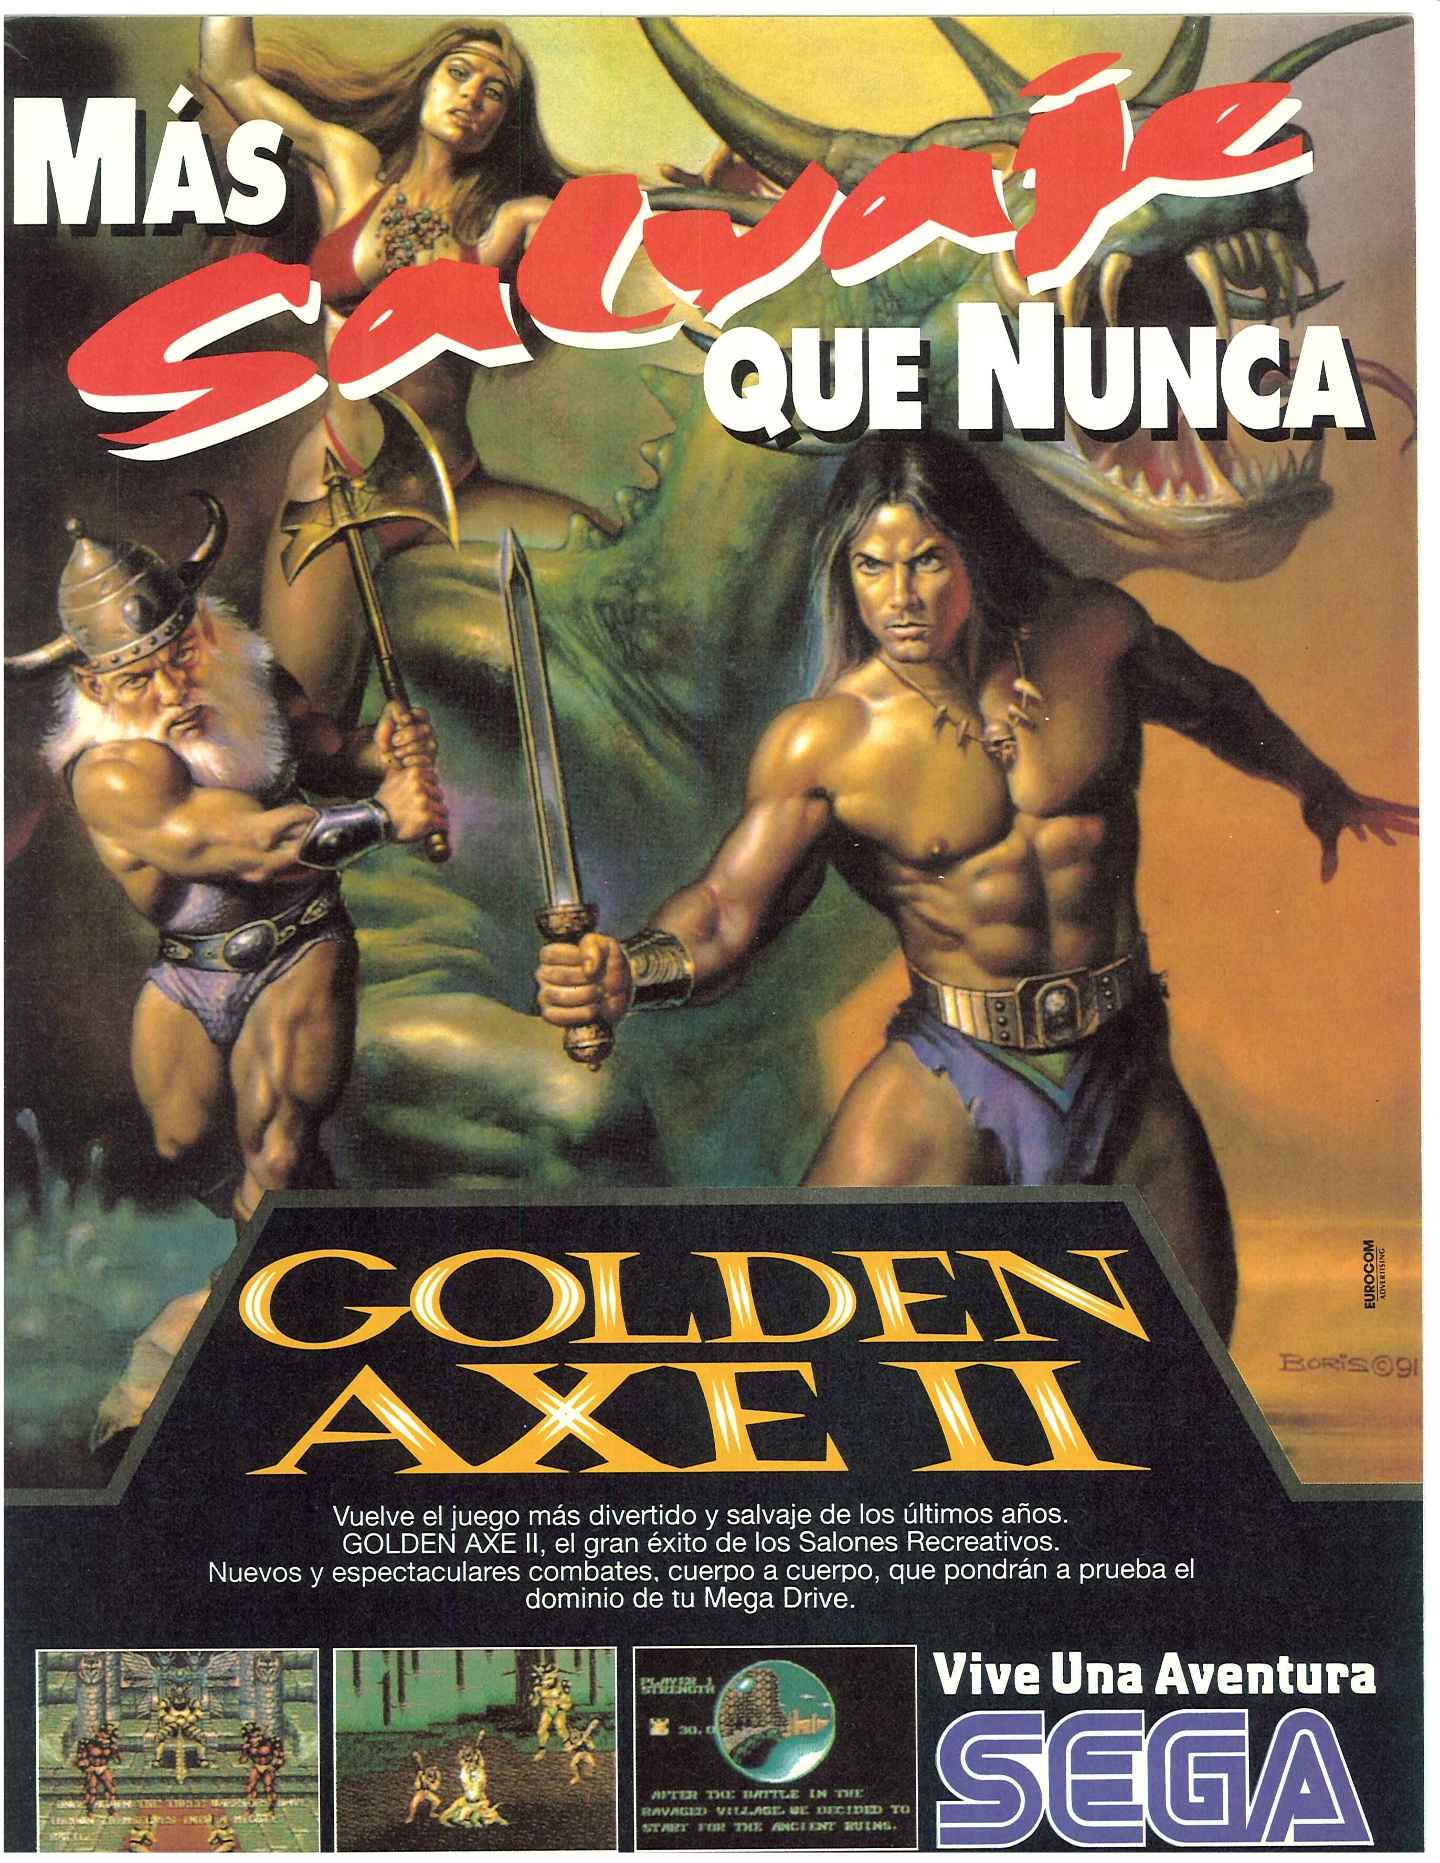 It’s been a while since we’ve had a foreign language ad on here, so here you go. Golden Axe II was the Mega Drive exclusive sequel to Golden Axe. Unlike […]